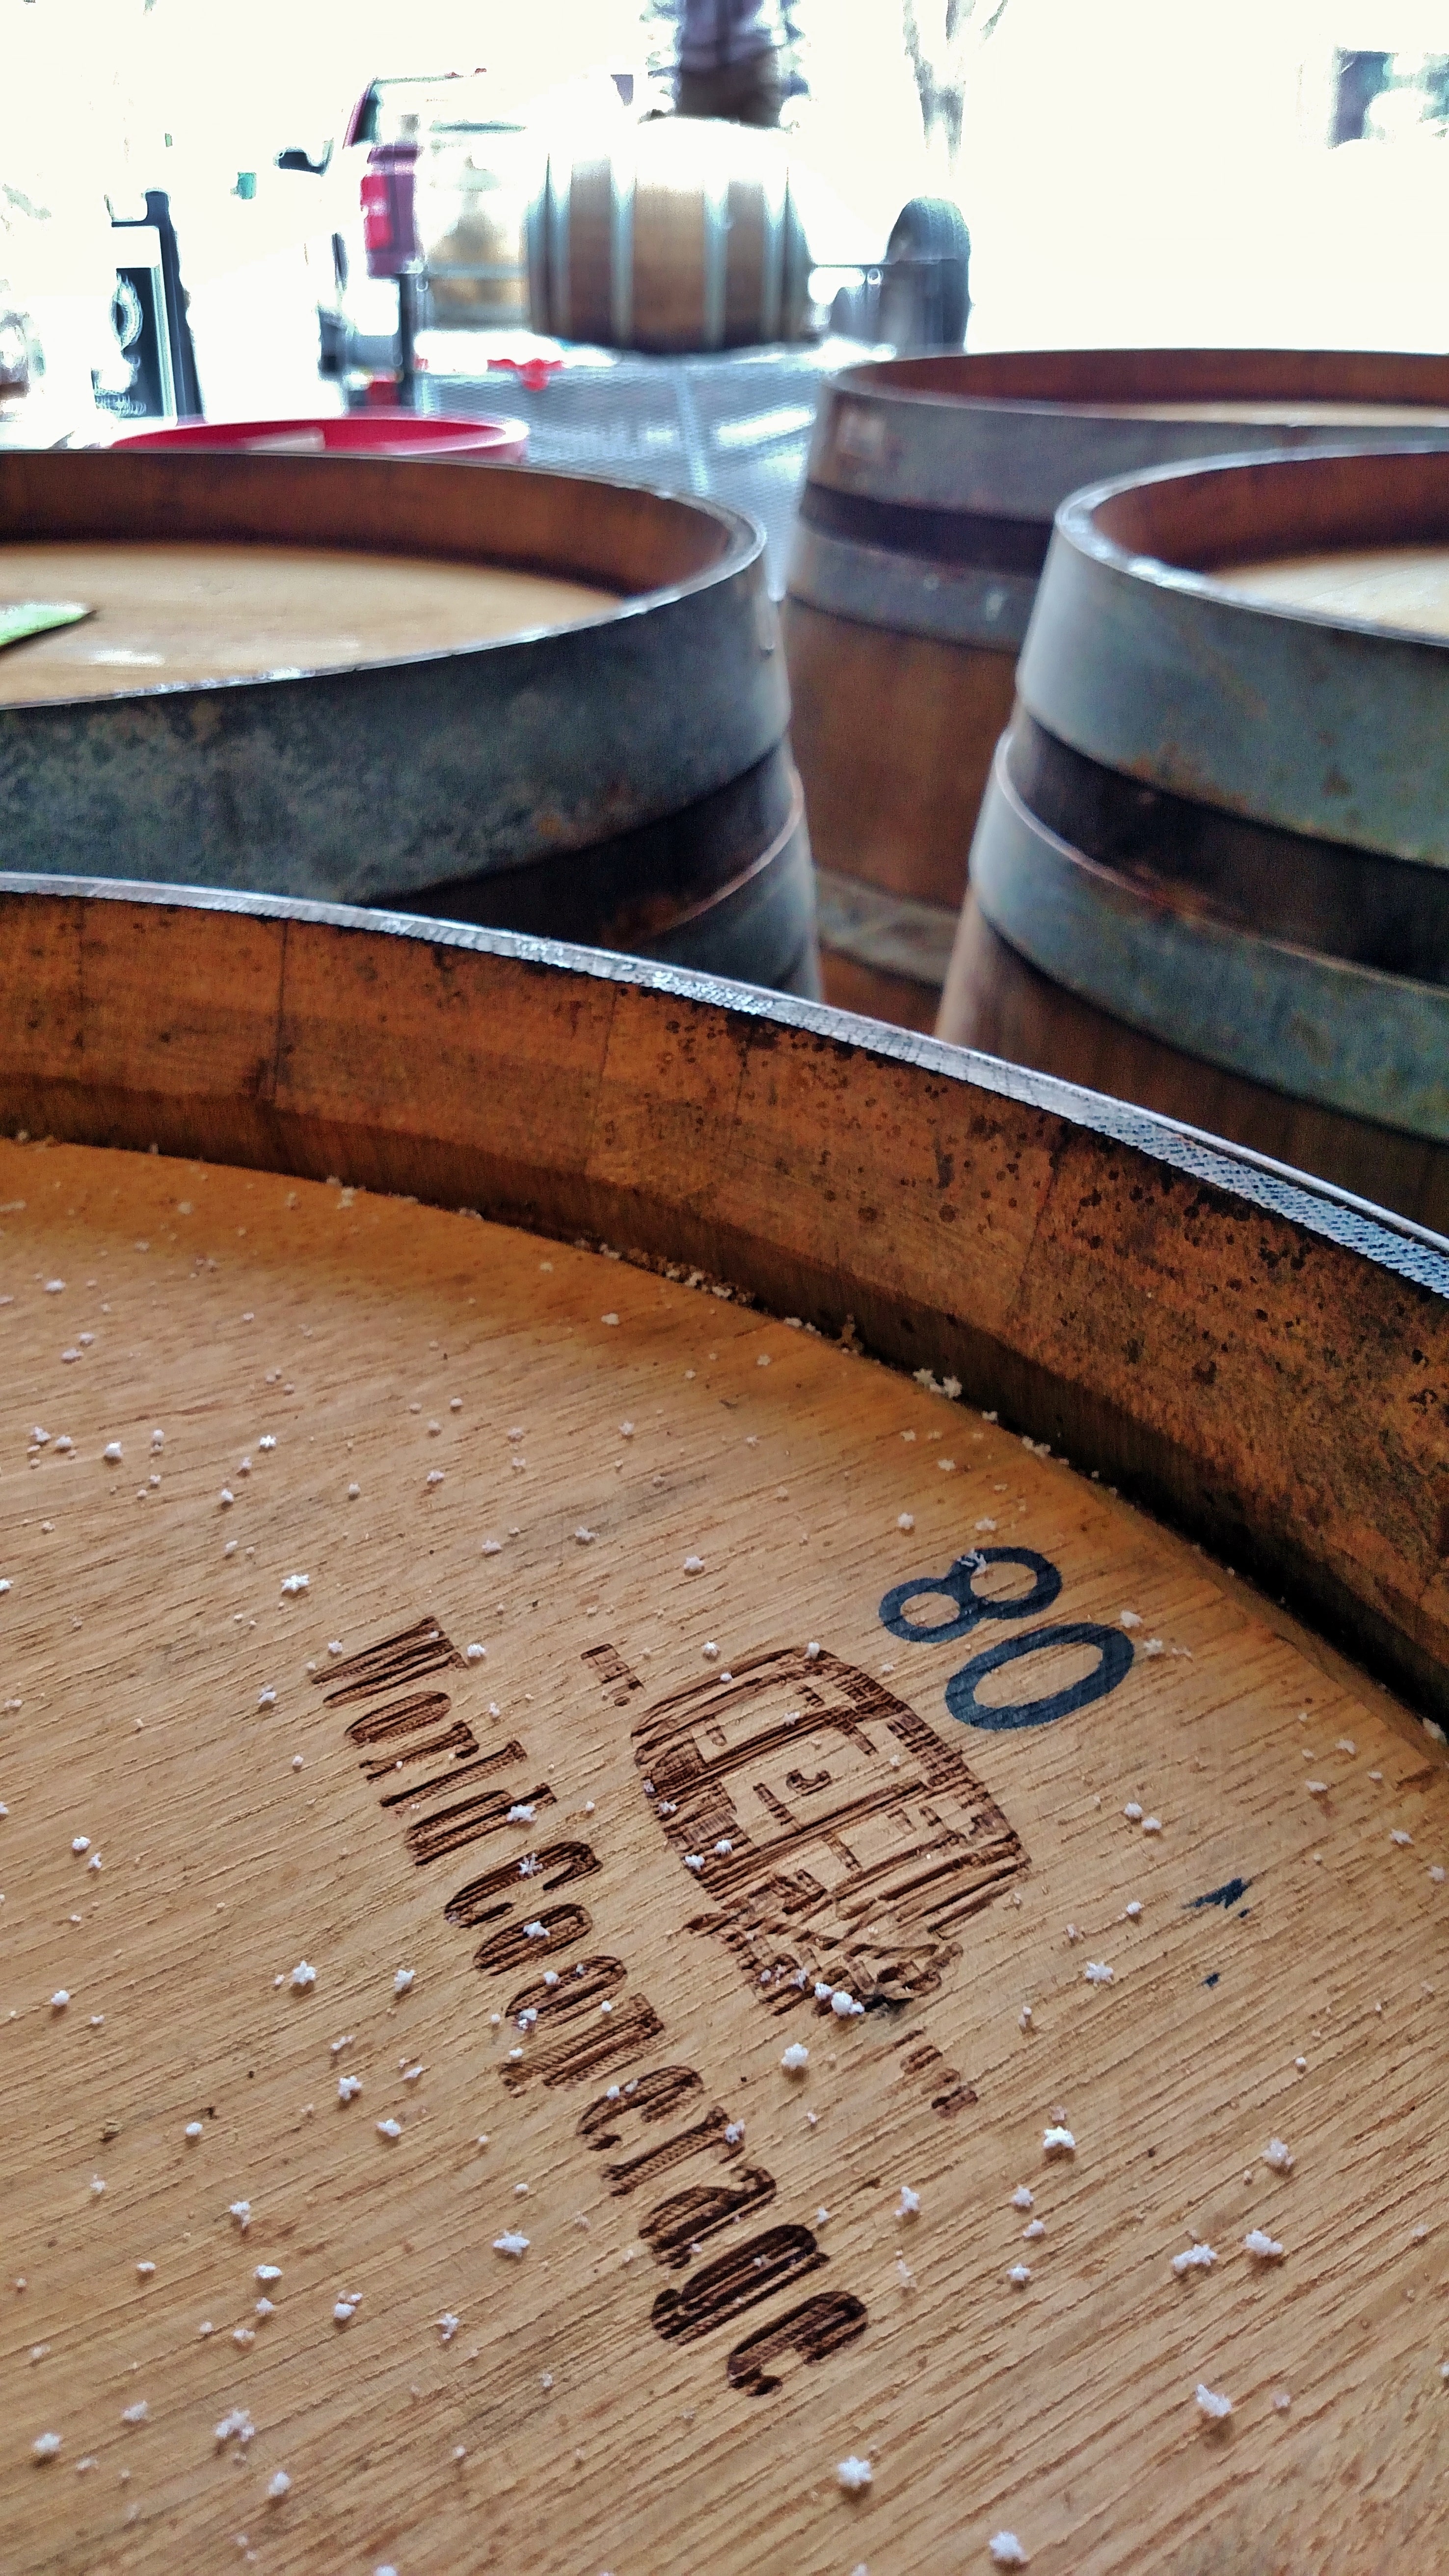 Thirteen new chardonnay barrels arrive at Red Rock during a gentle snowfall.